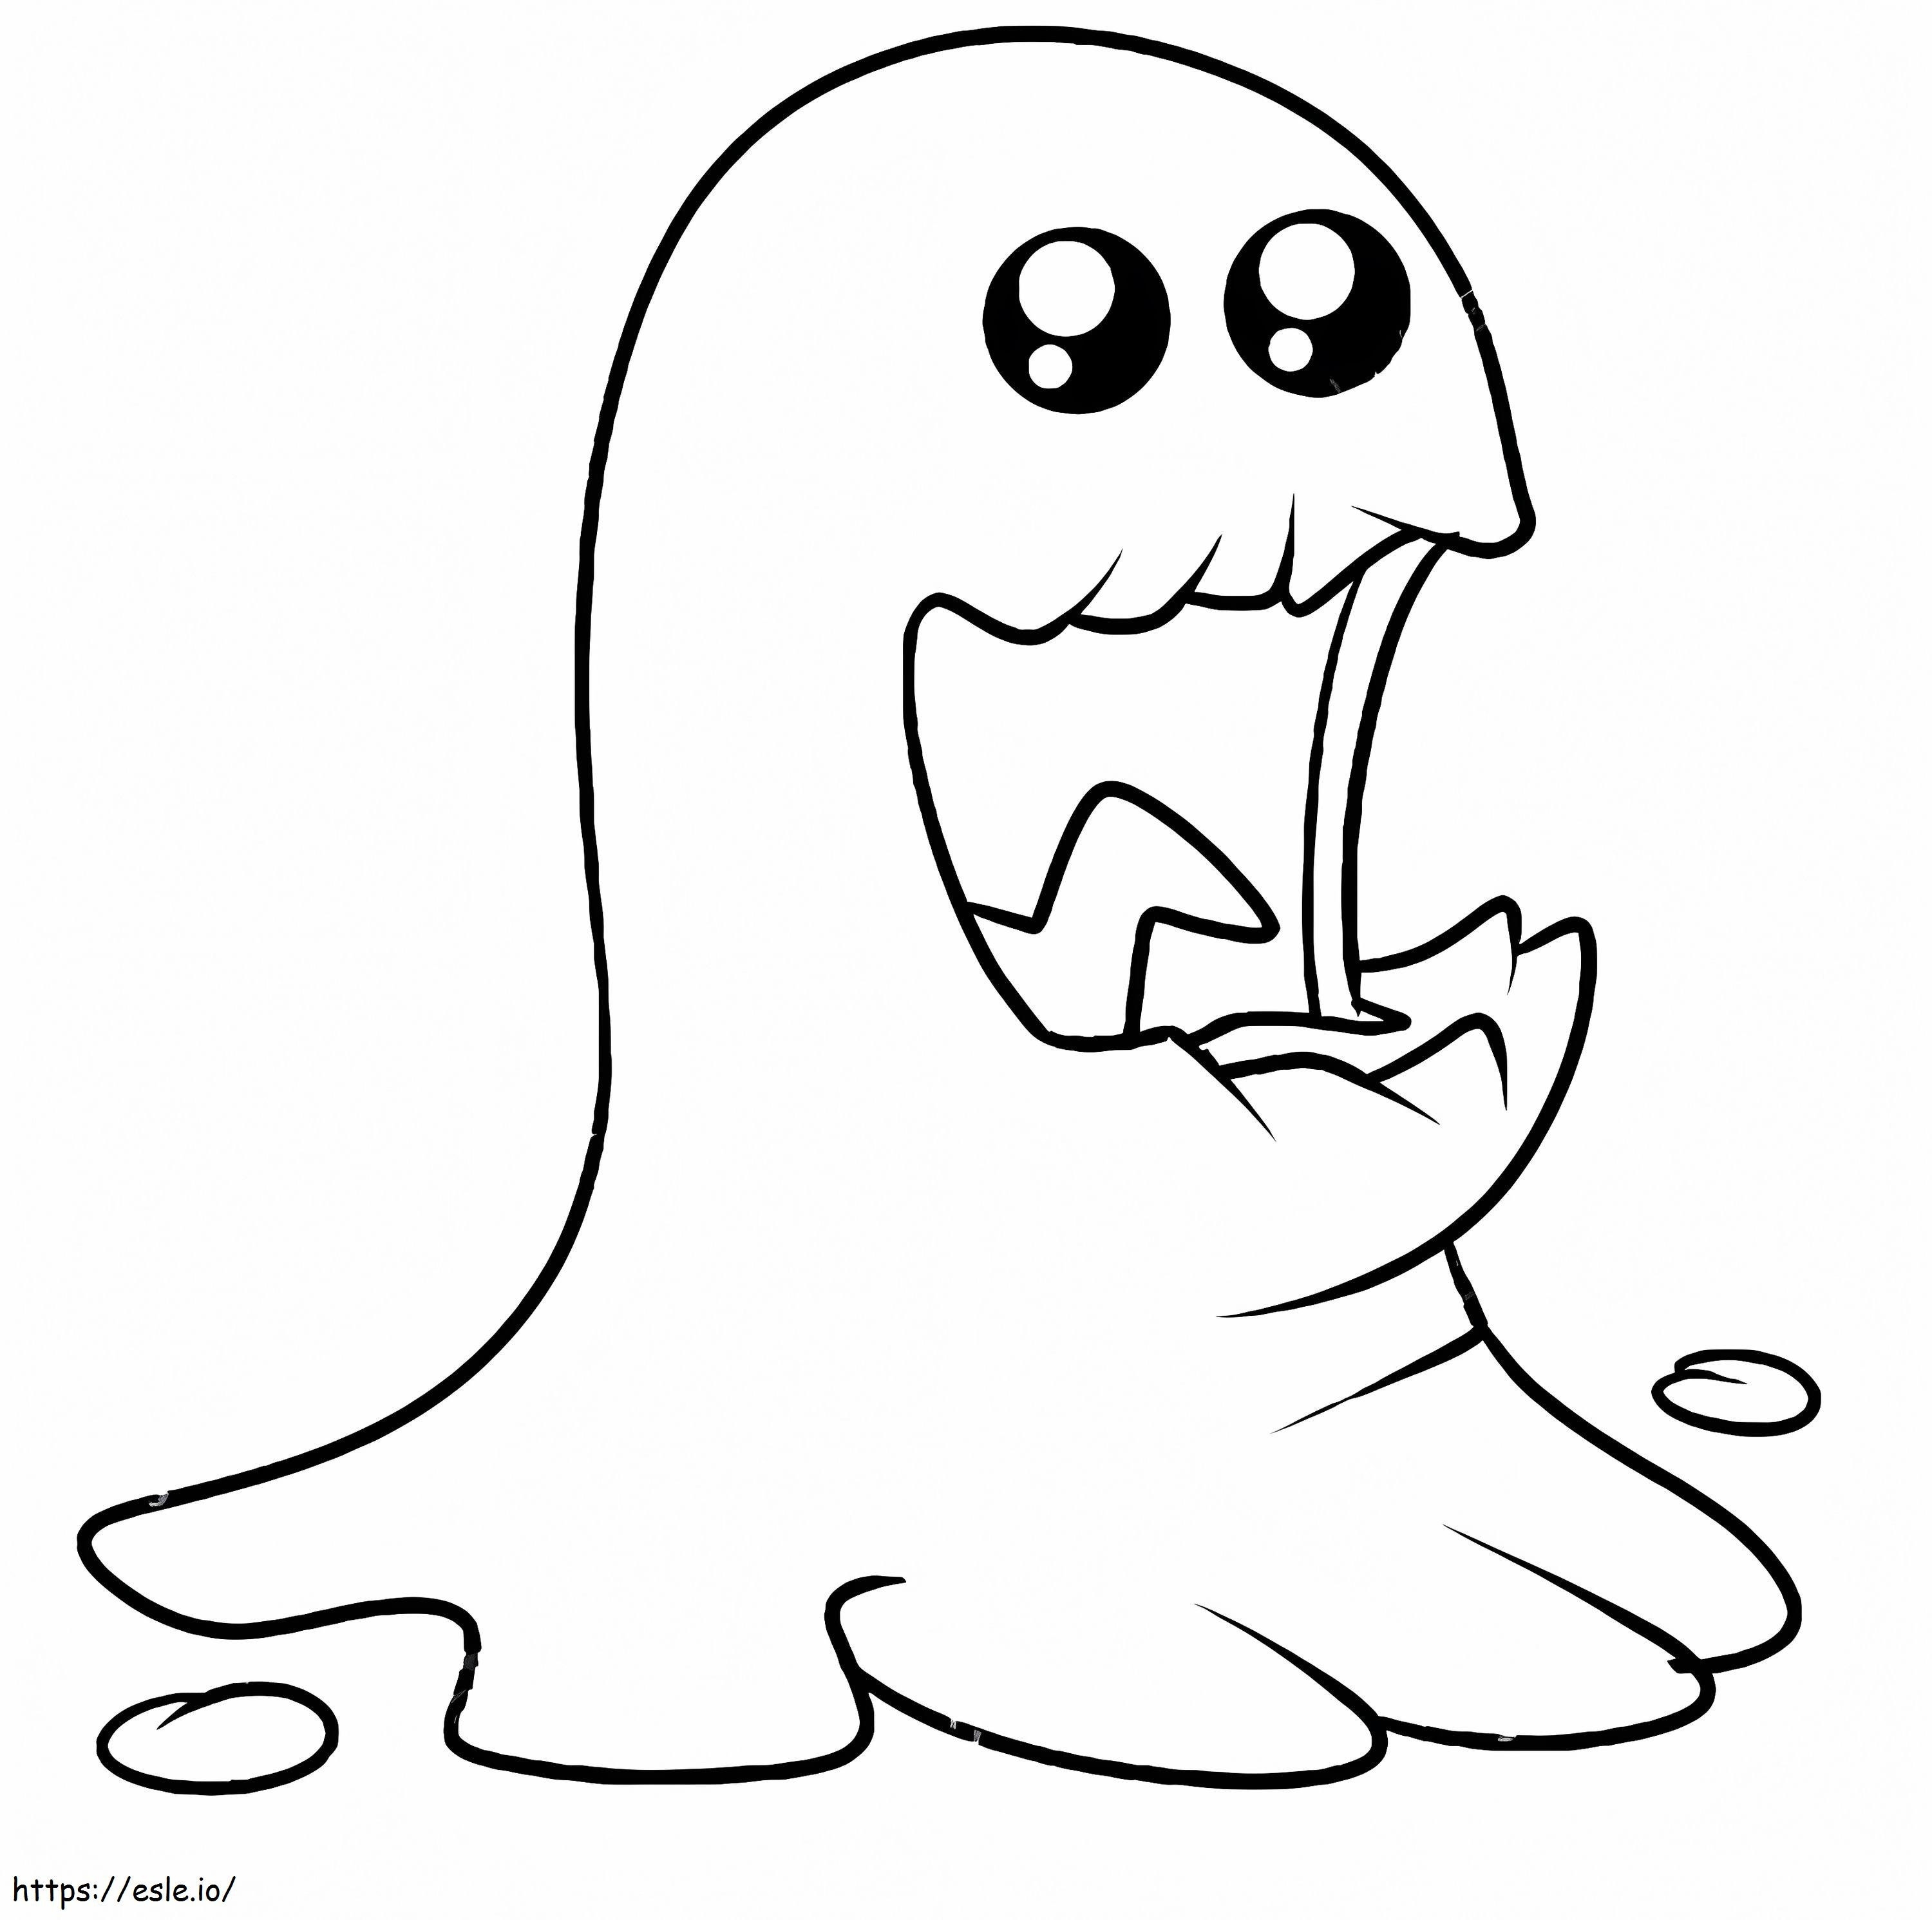 Slime Monster coloring page